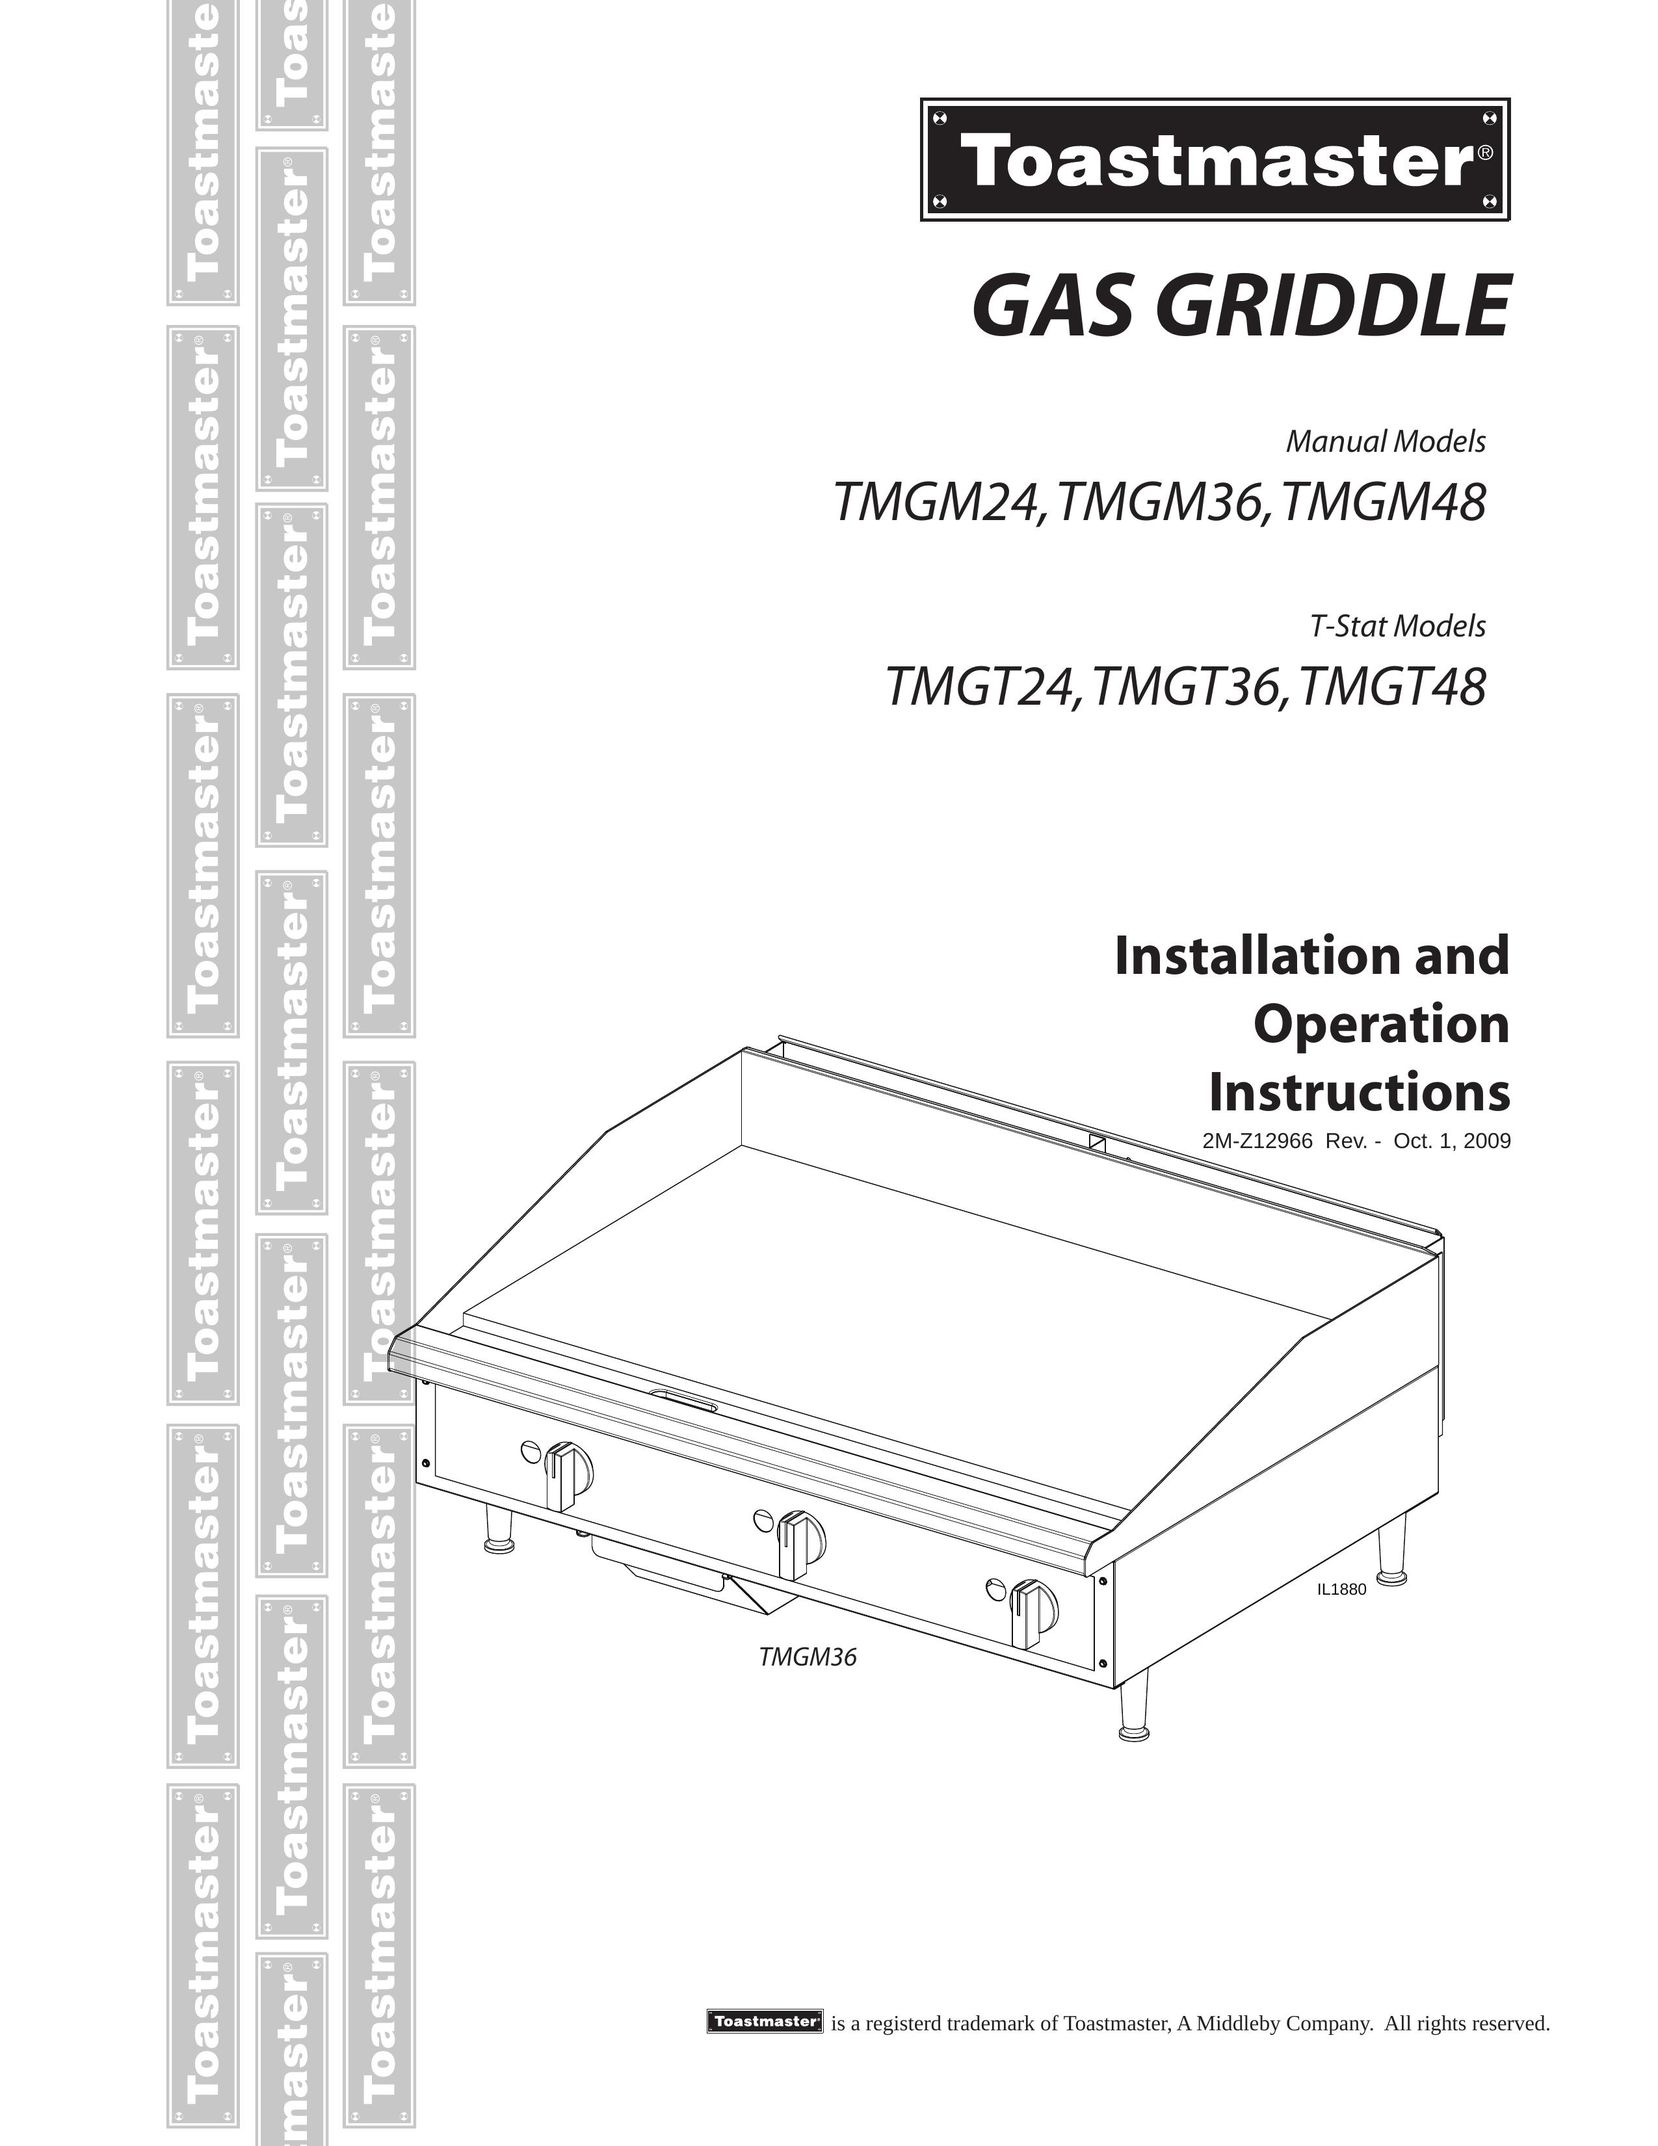 Toastmaster TMGM24 Griddle User Manual